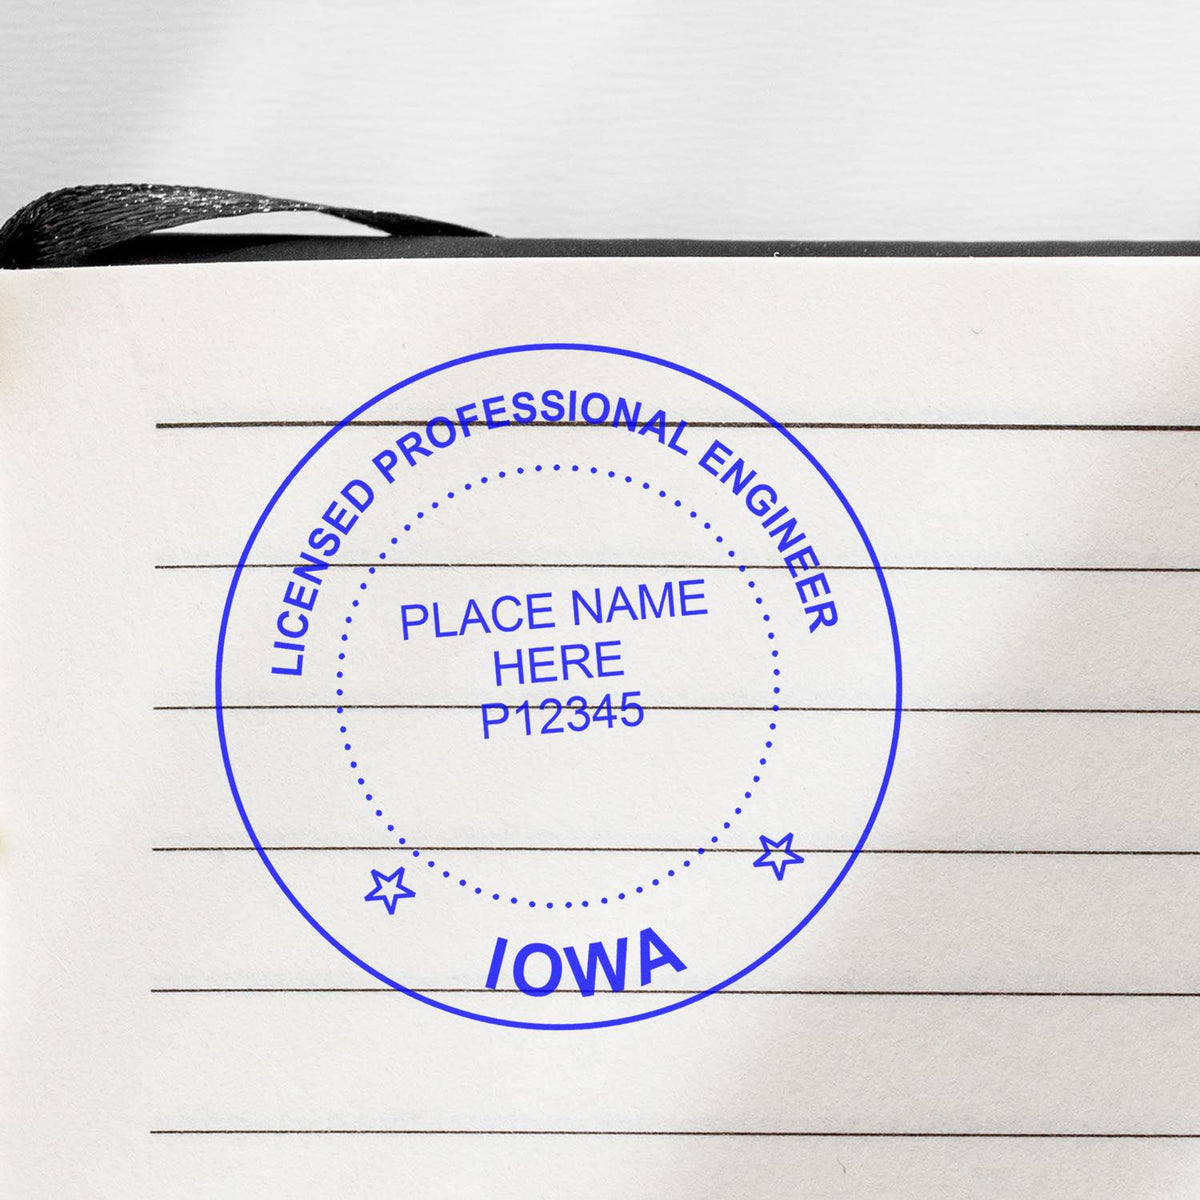 An alternative view of the Iowa Professional Engineer Seal Stamp stamped on a sheet of paper showing the image in use